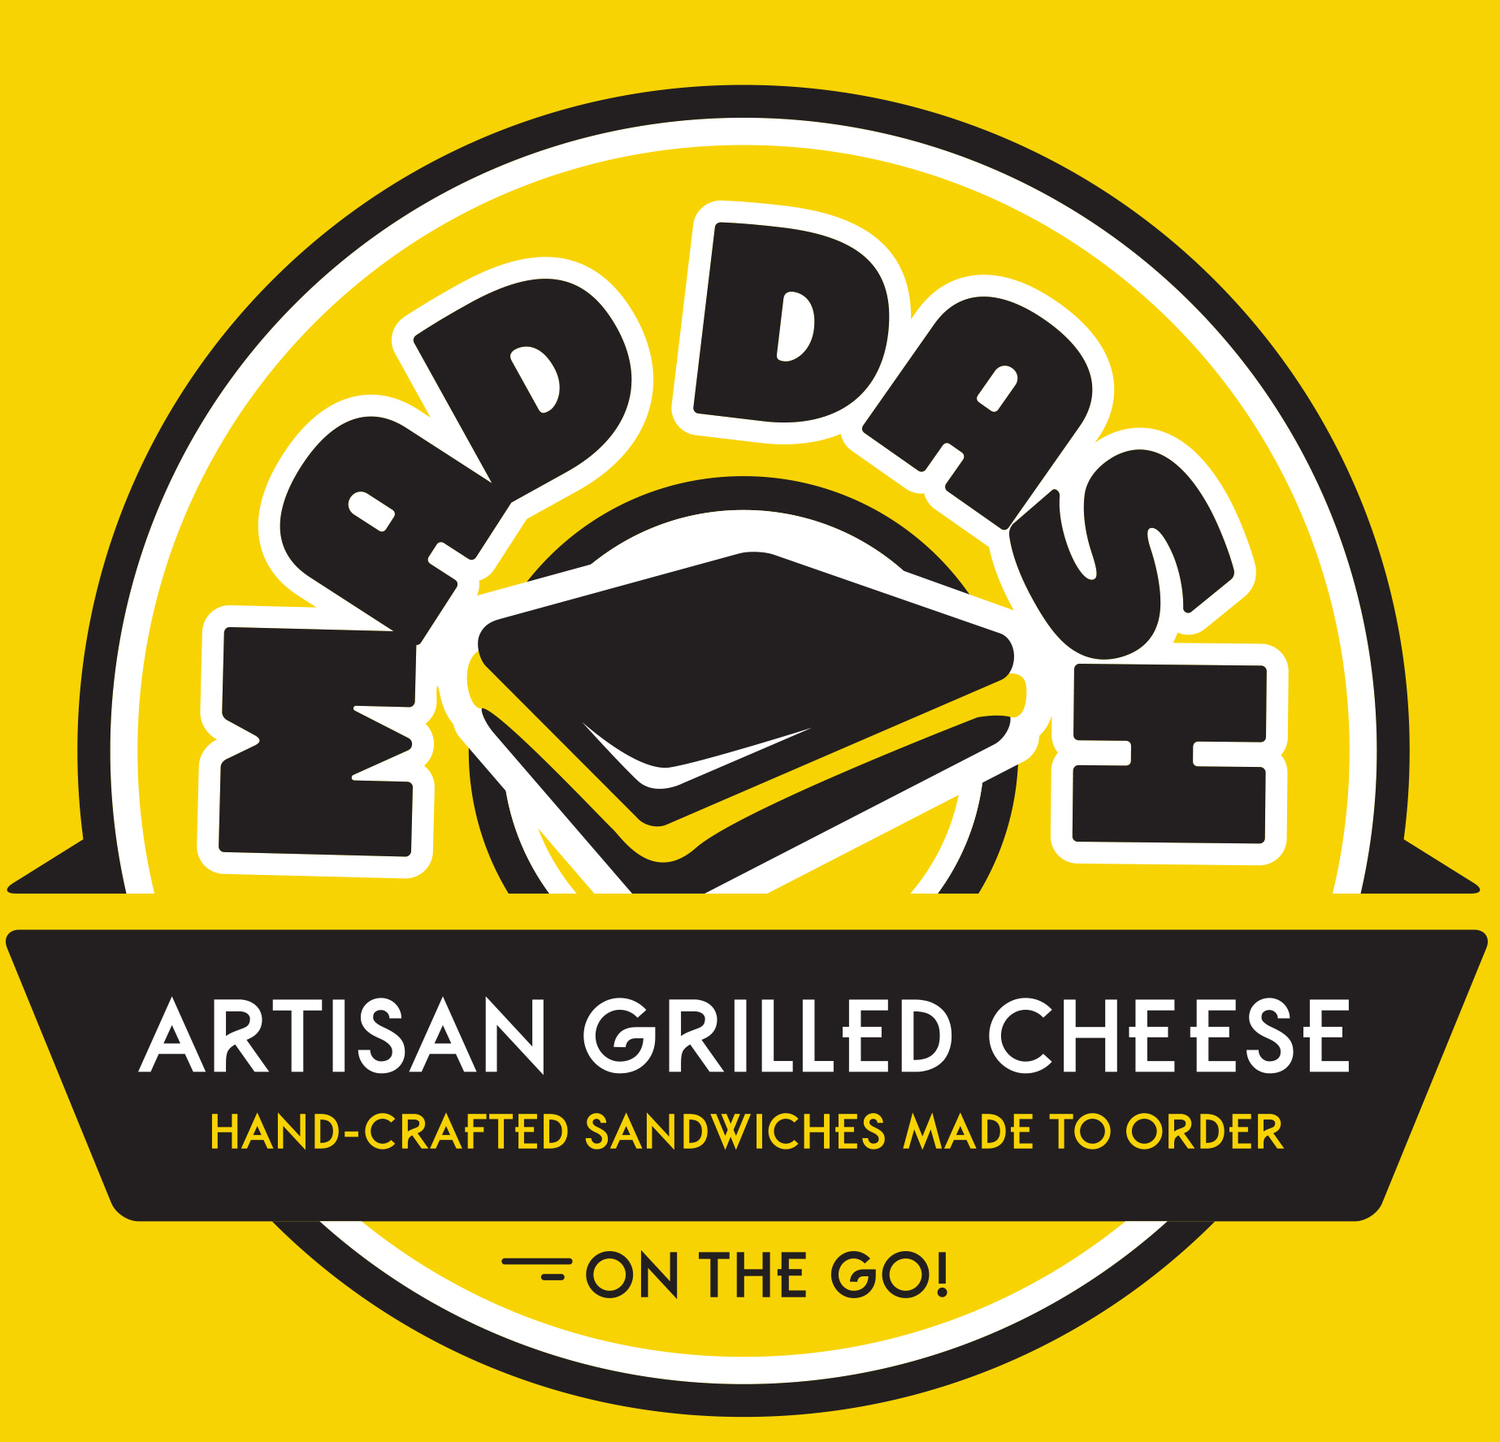 Mad Dash Grilled Cheese